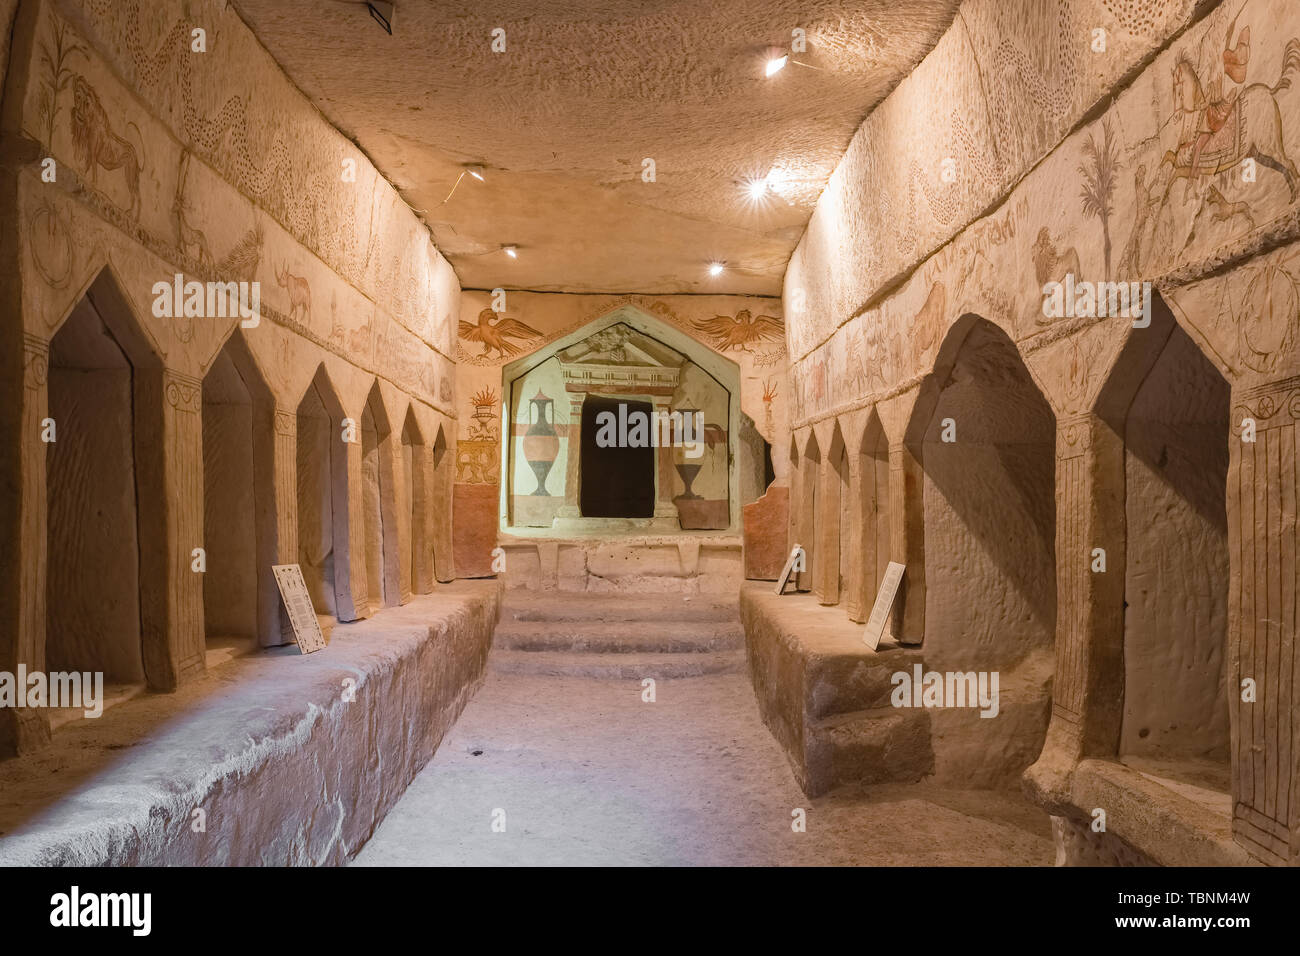 Burial cave in in National park Beit Guvrin, Israel Stock Photo